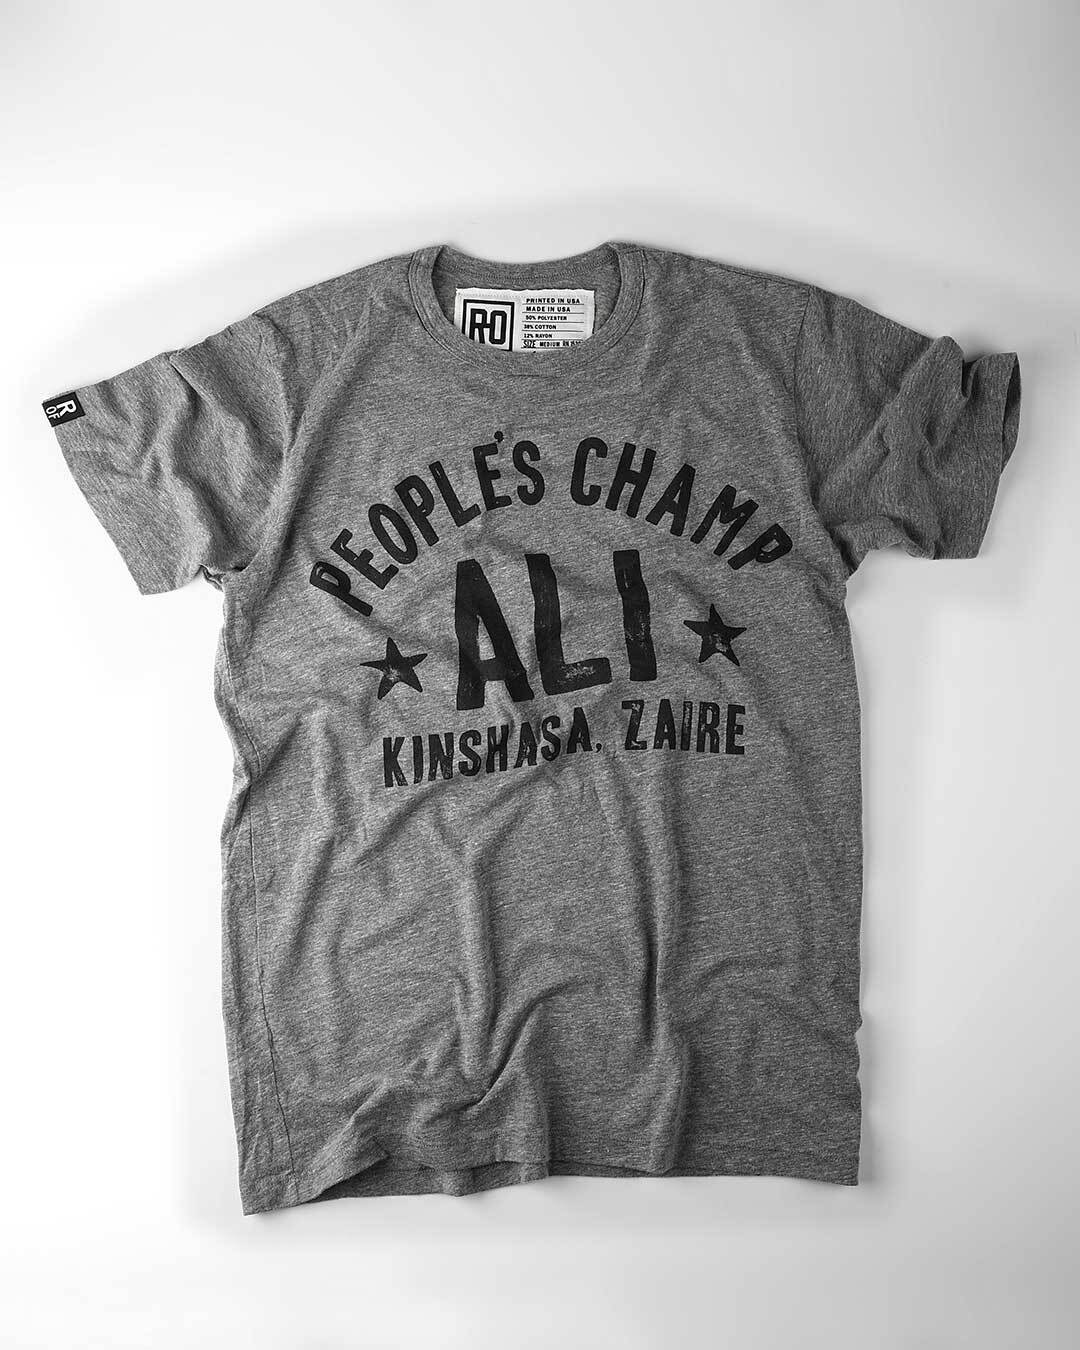 Ali Rumble Quote Tee - Roots of Fight Canada